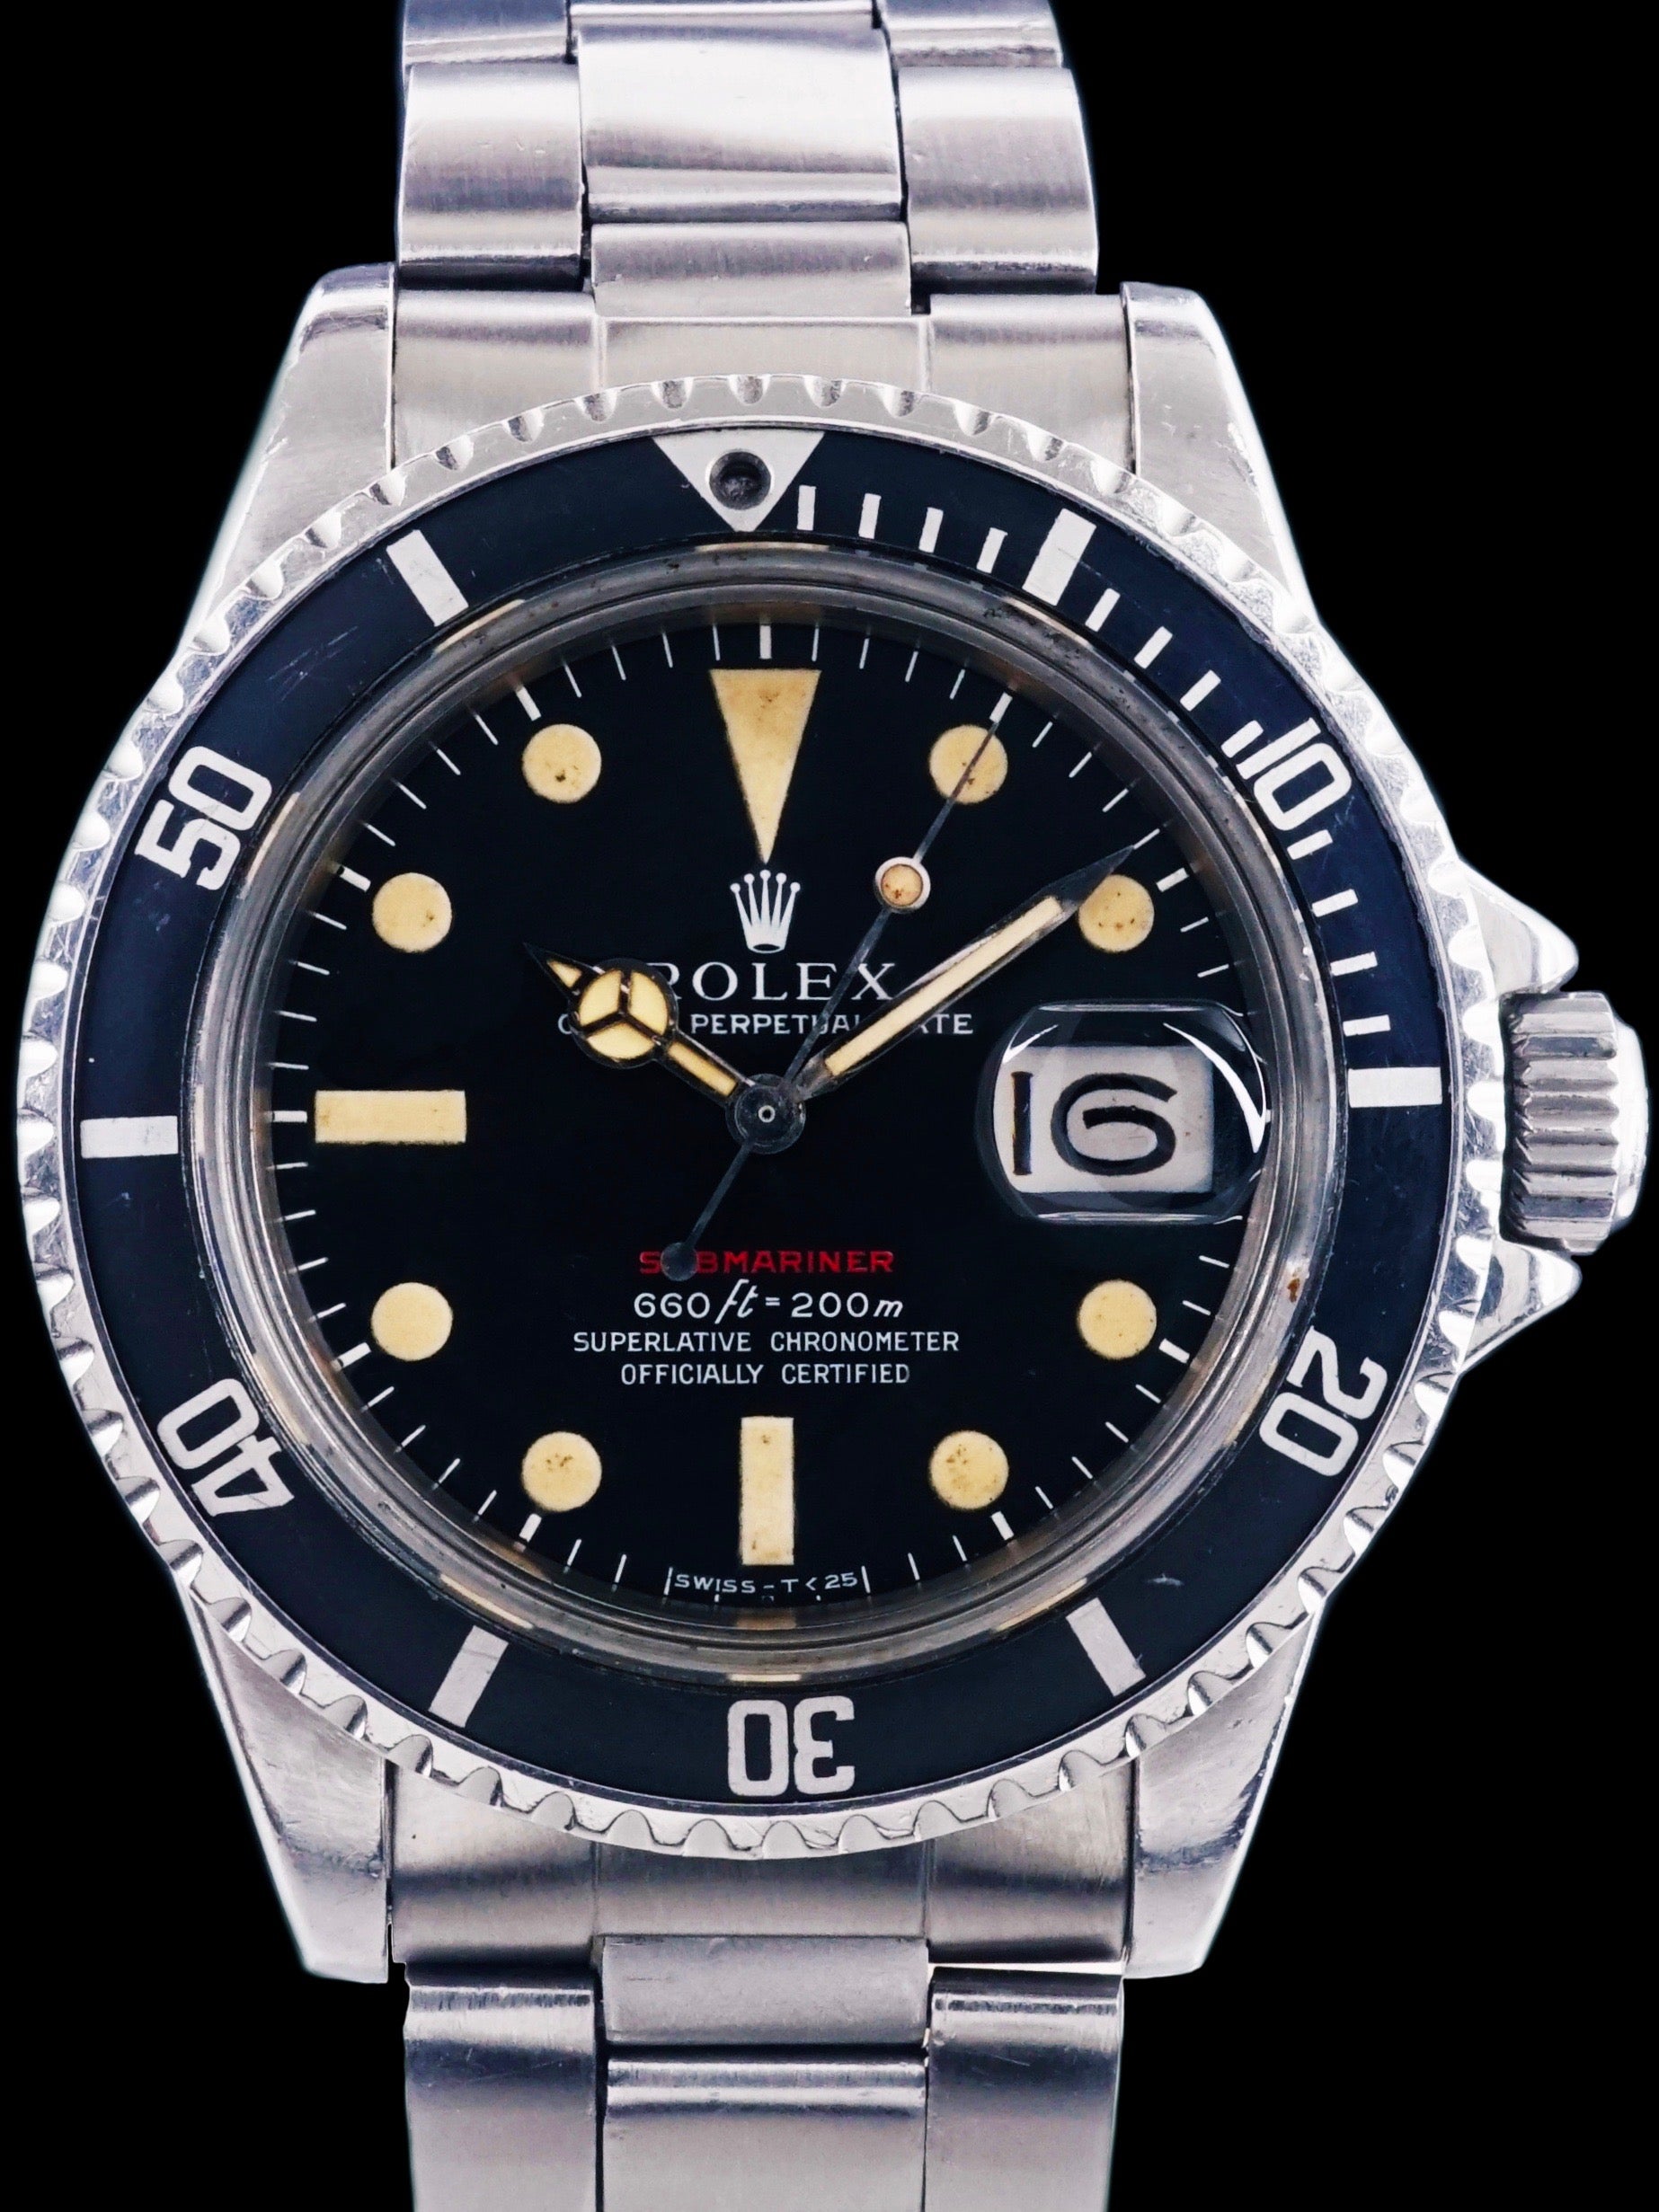 1972 Rolex Red Submariner (Ref. 1680) "Mk. IV Dial" With Box and Double Punched Papers